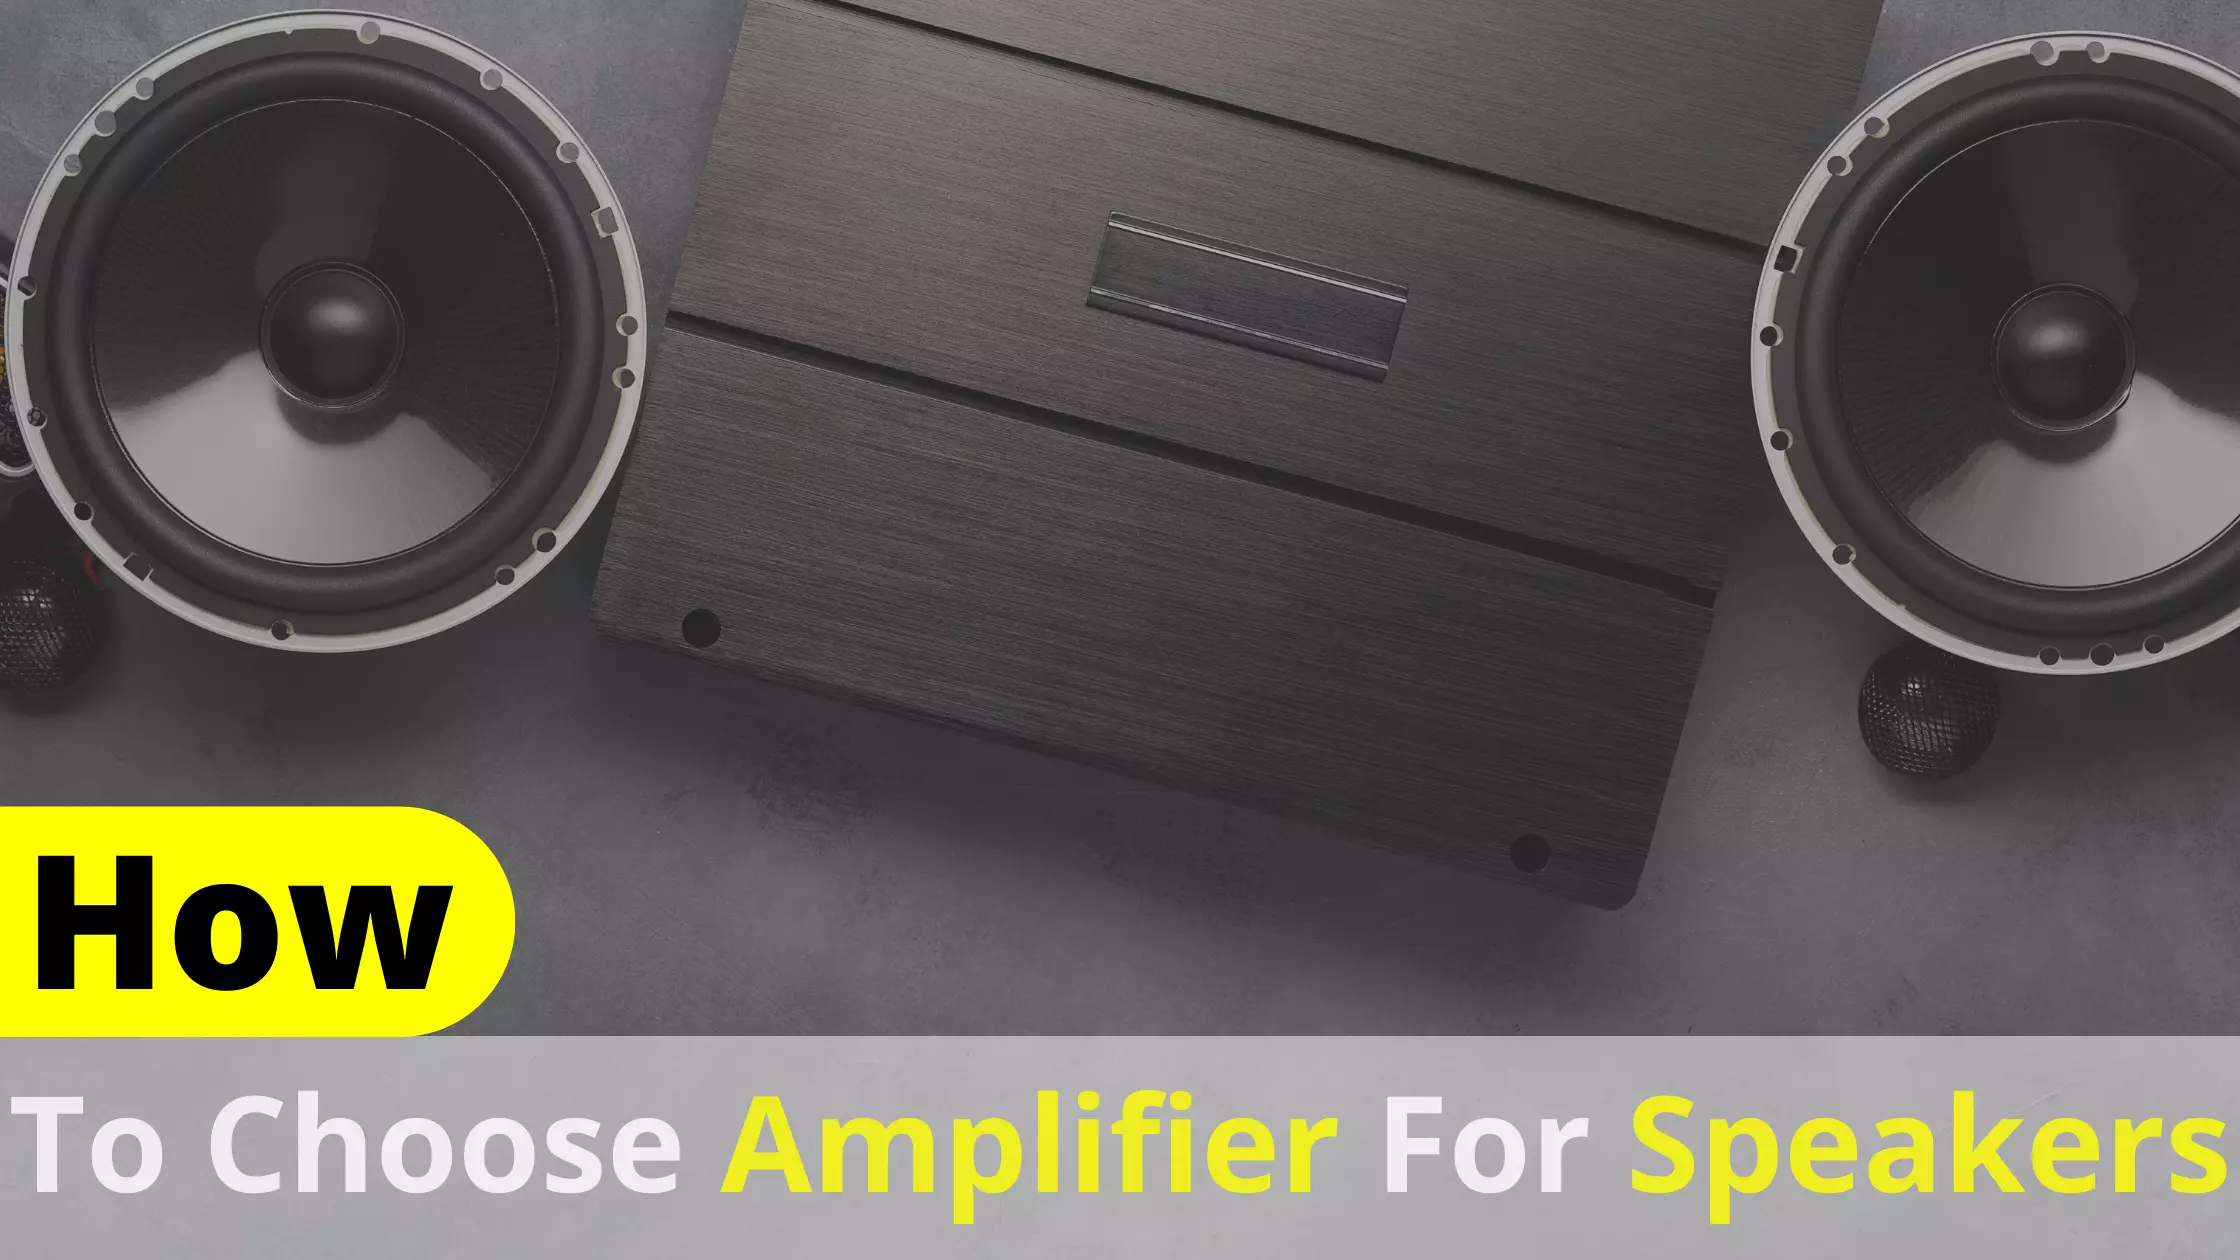 How To Choose An Amplifier For Speakers? Guide 2022